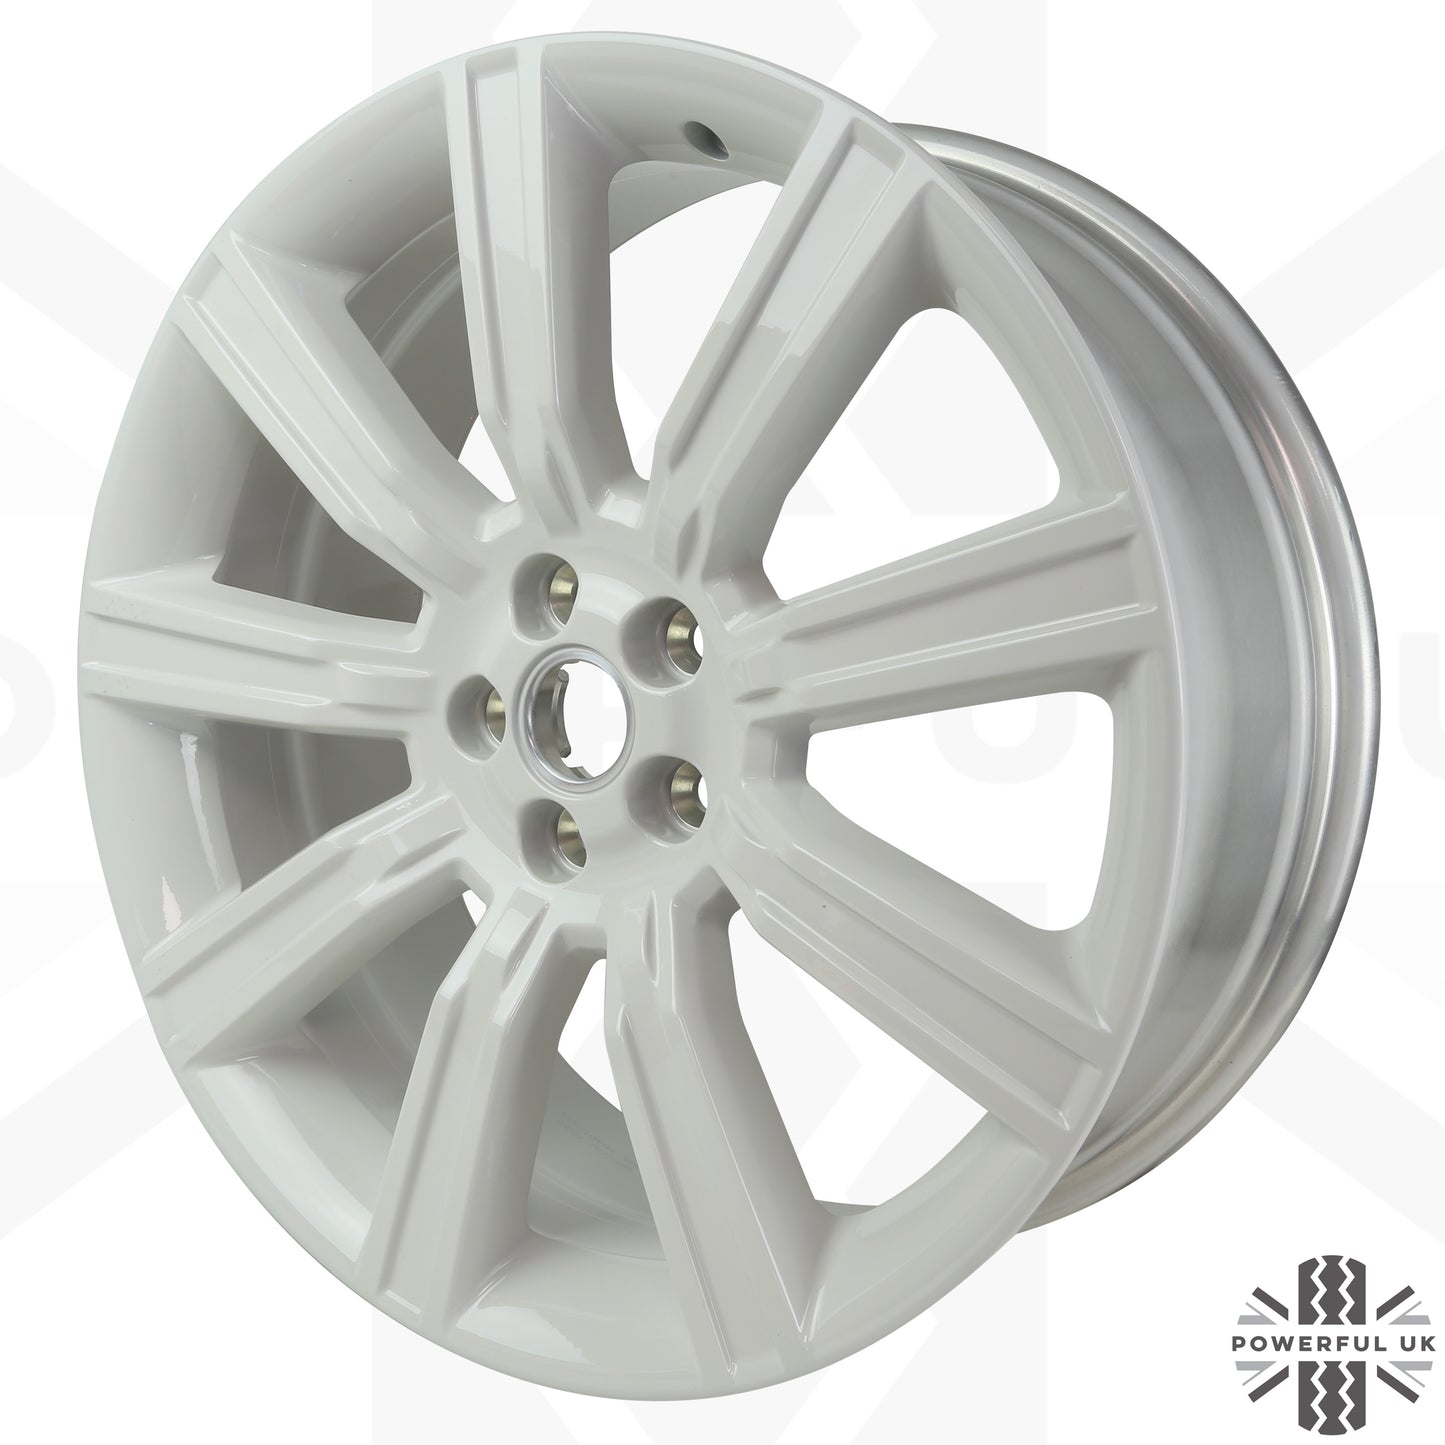 20" Alloy Wheels (Style 9001) - Fuji White - Set of 4 for Land Rover Discovery Sport Genuine